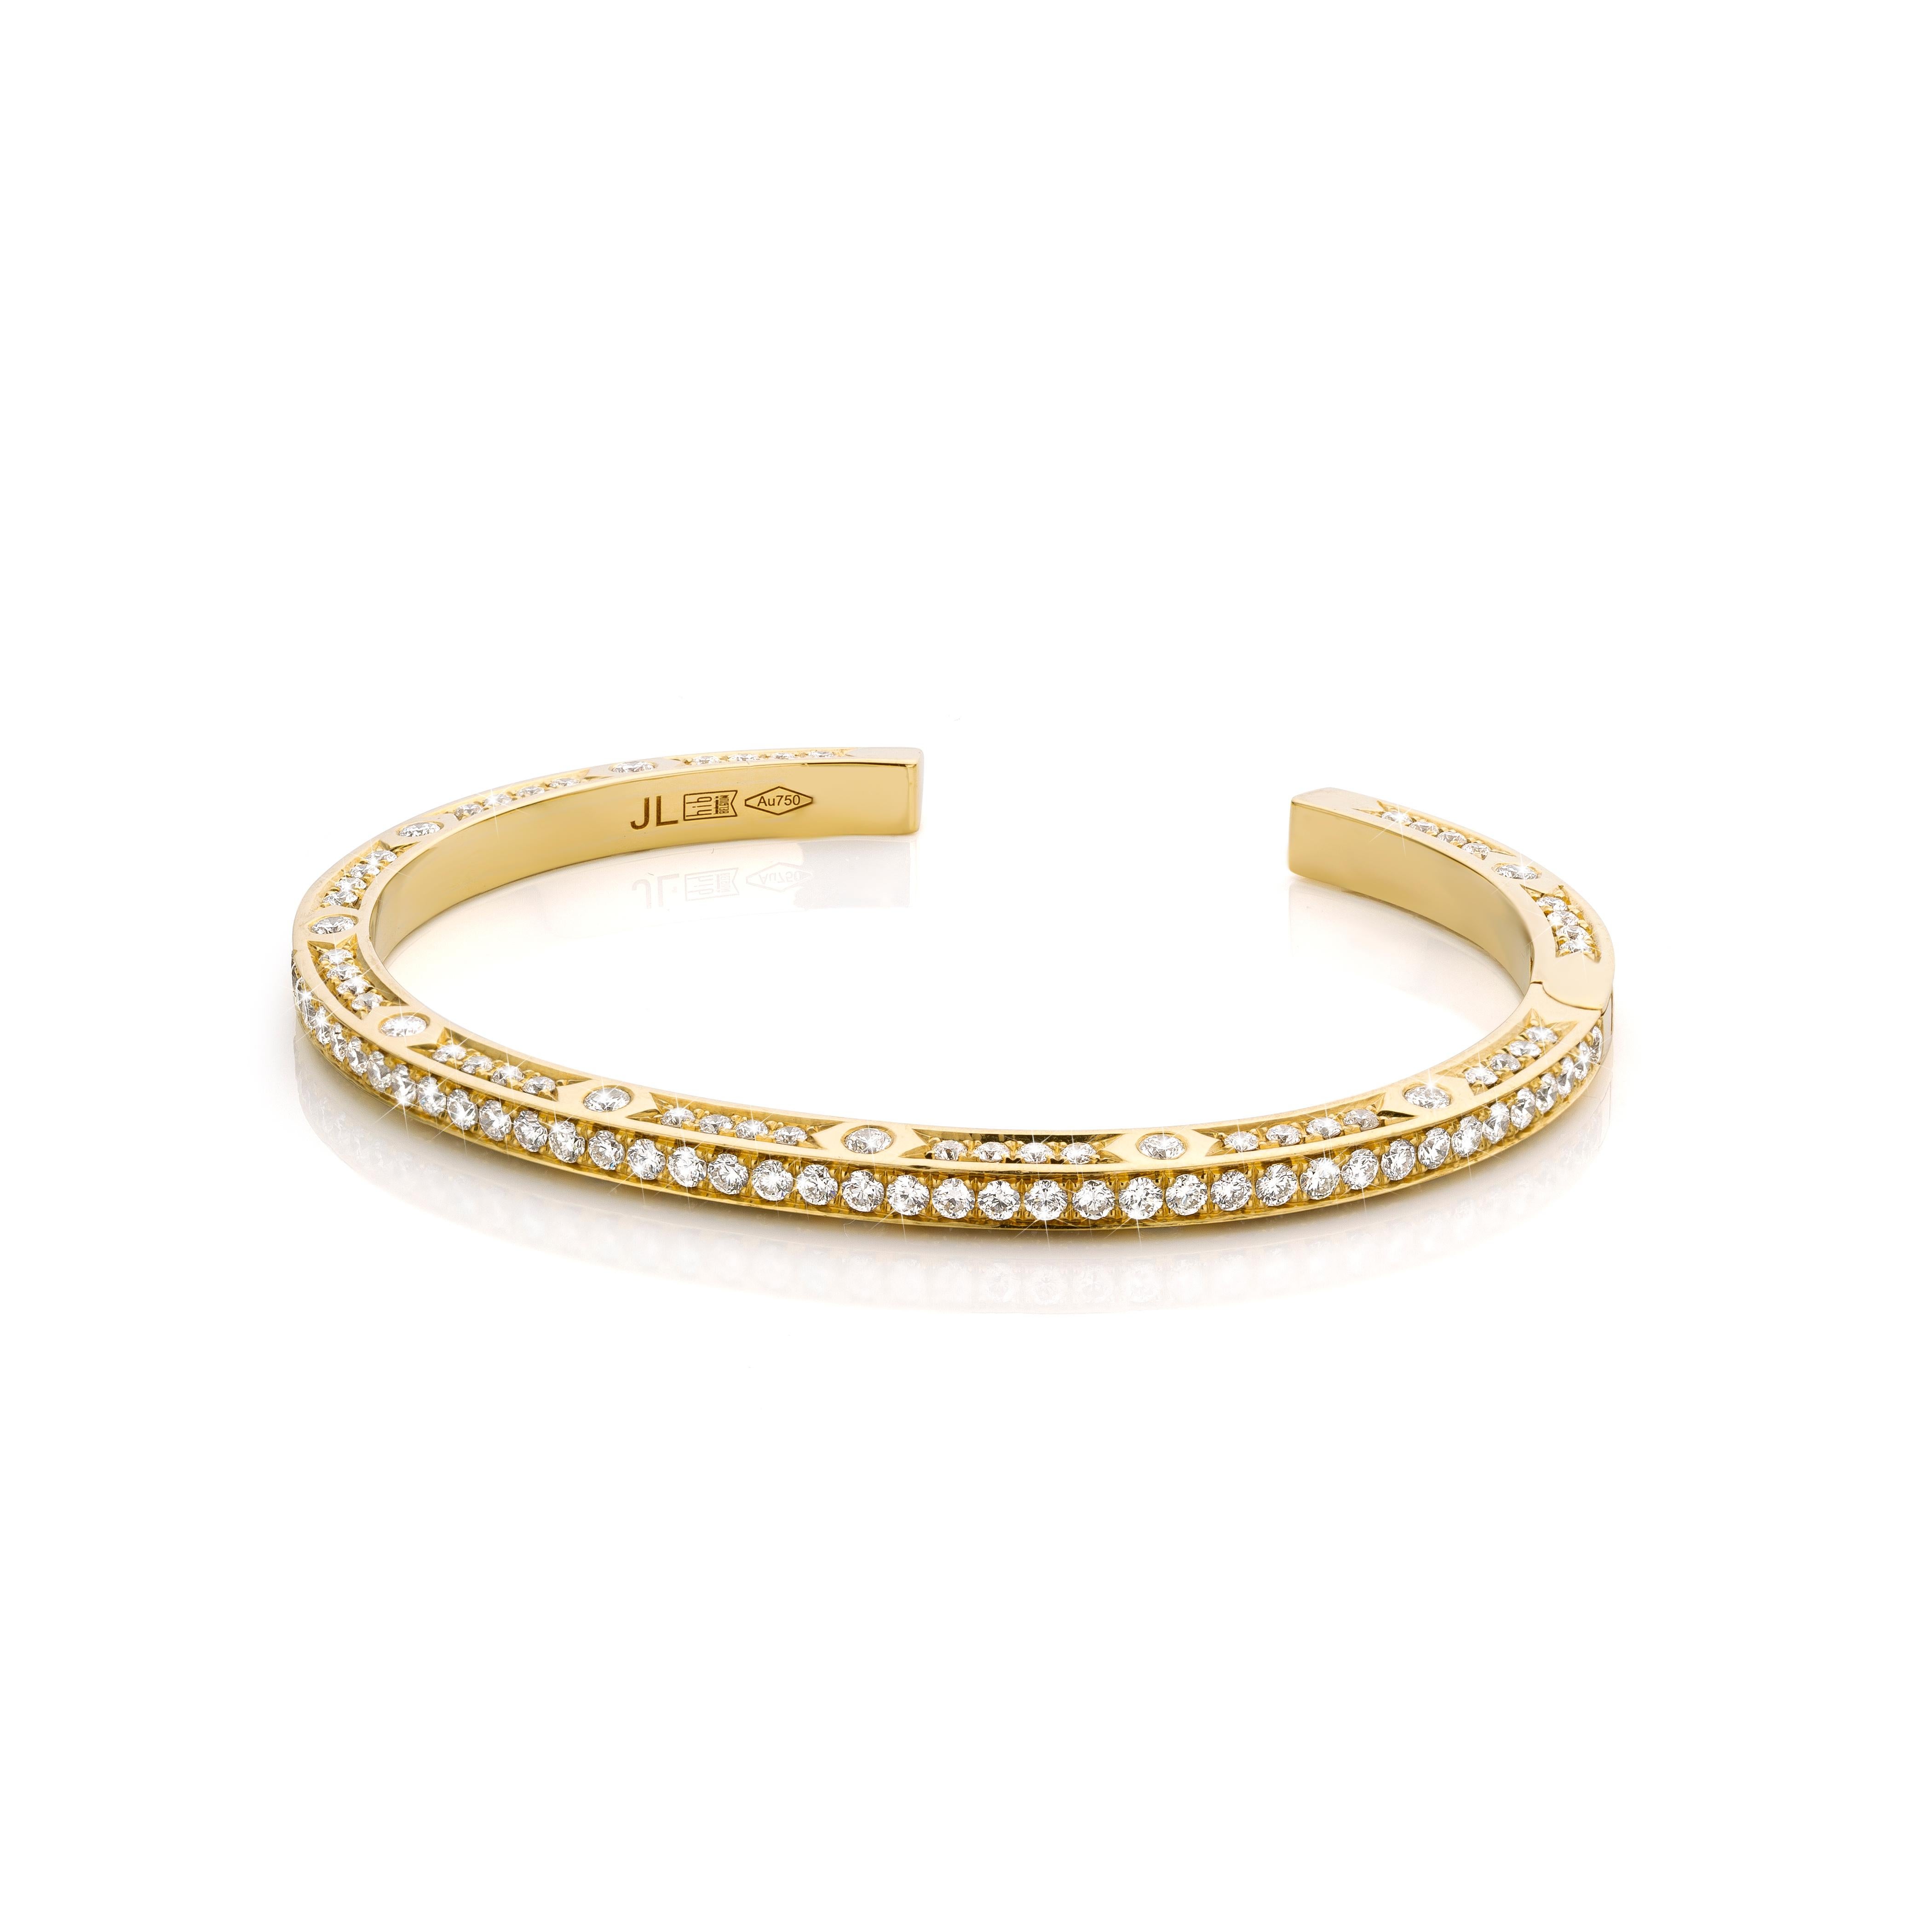 18 Karat Yellow gold Bracelet set with 4.21 Carat brilliant cut White Diamonds.

This design is one of Jochen Leen's first designs and is highly recognizable.
This bracelet is well suited to be worn as an every day bracelet and is easy to match with